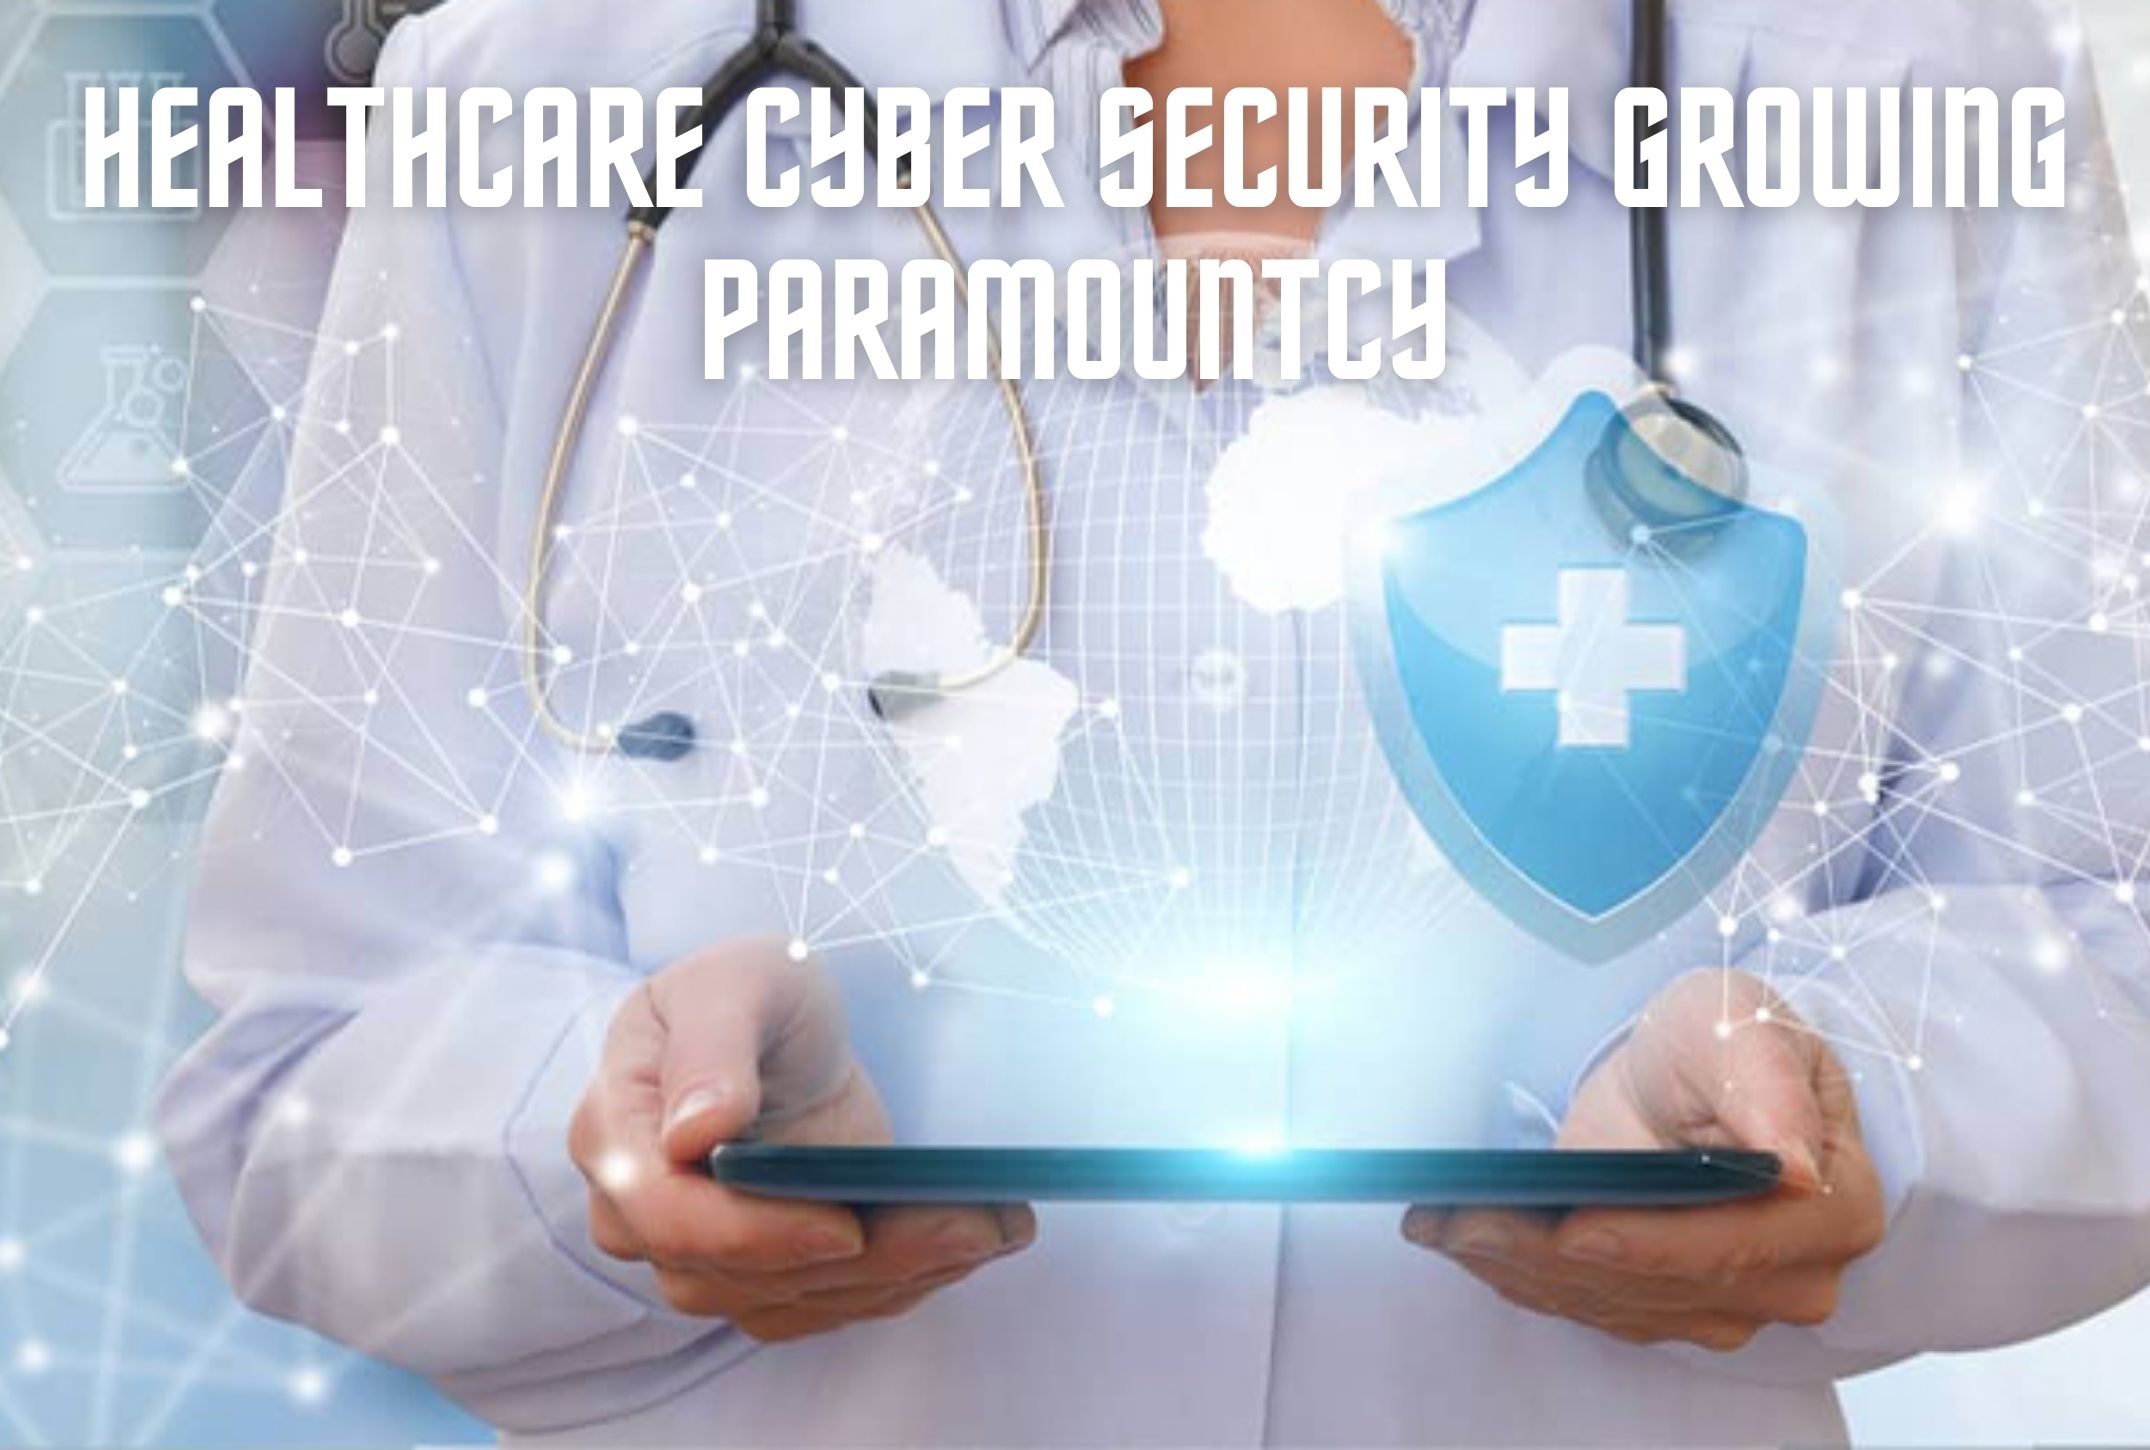 Healthcare Cyber Security growing Paramountcy